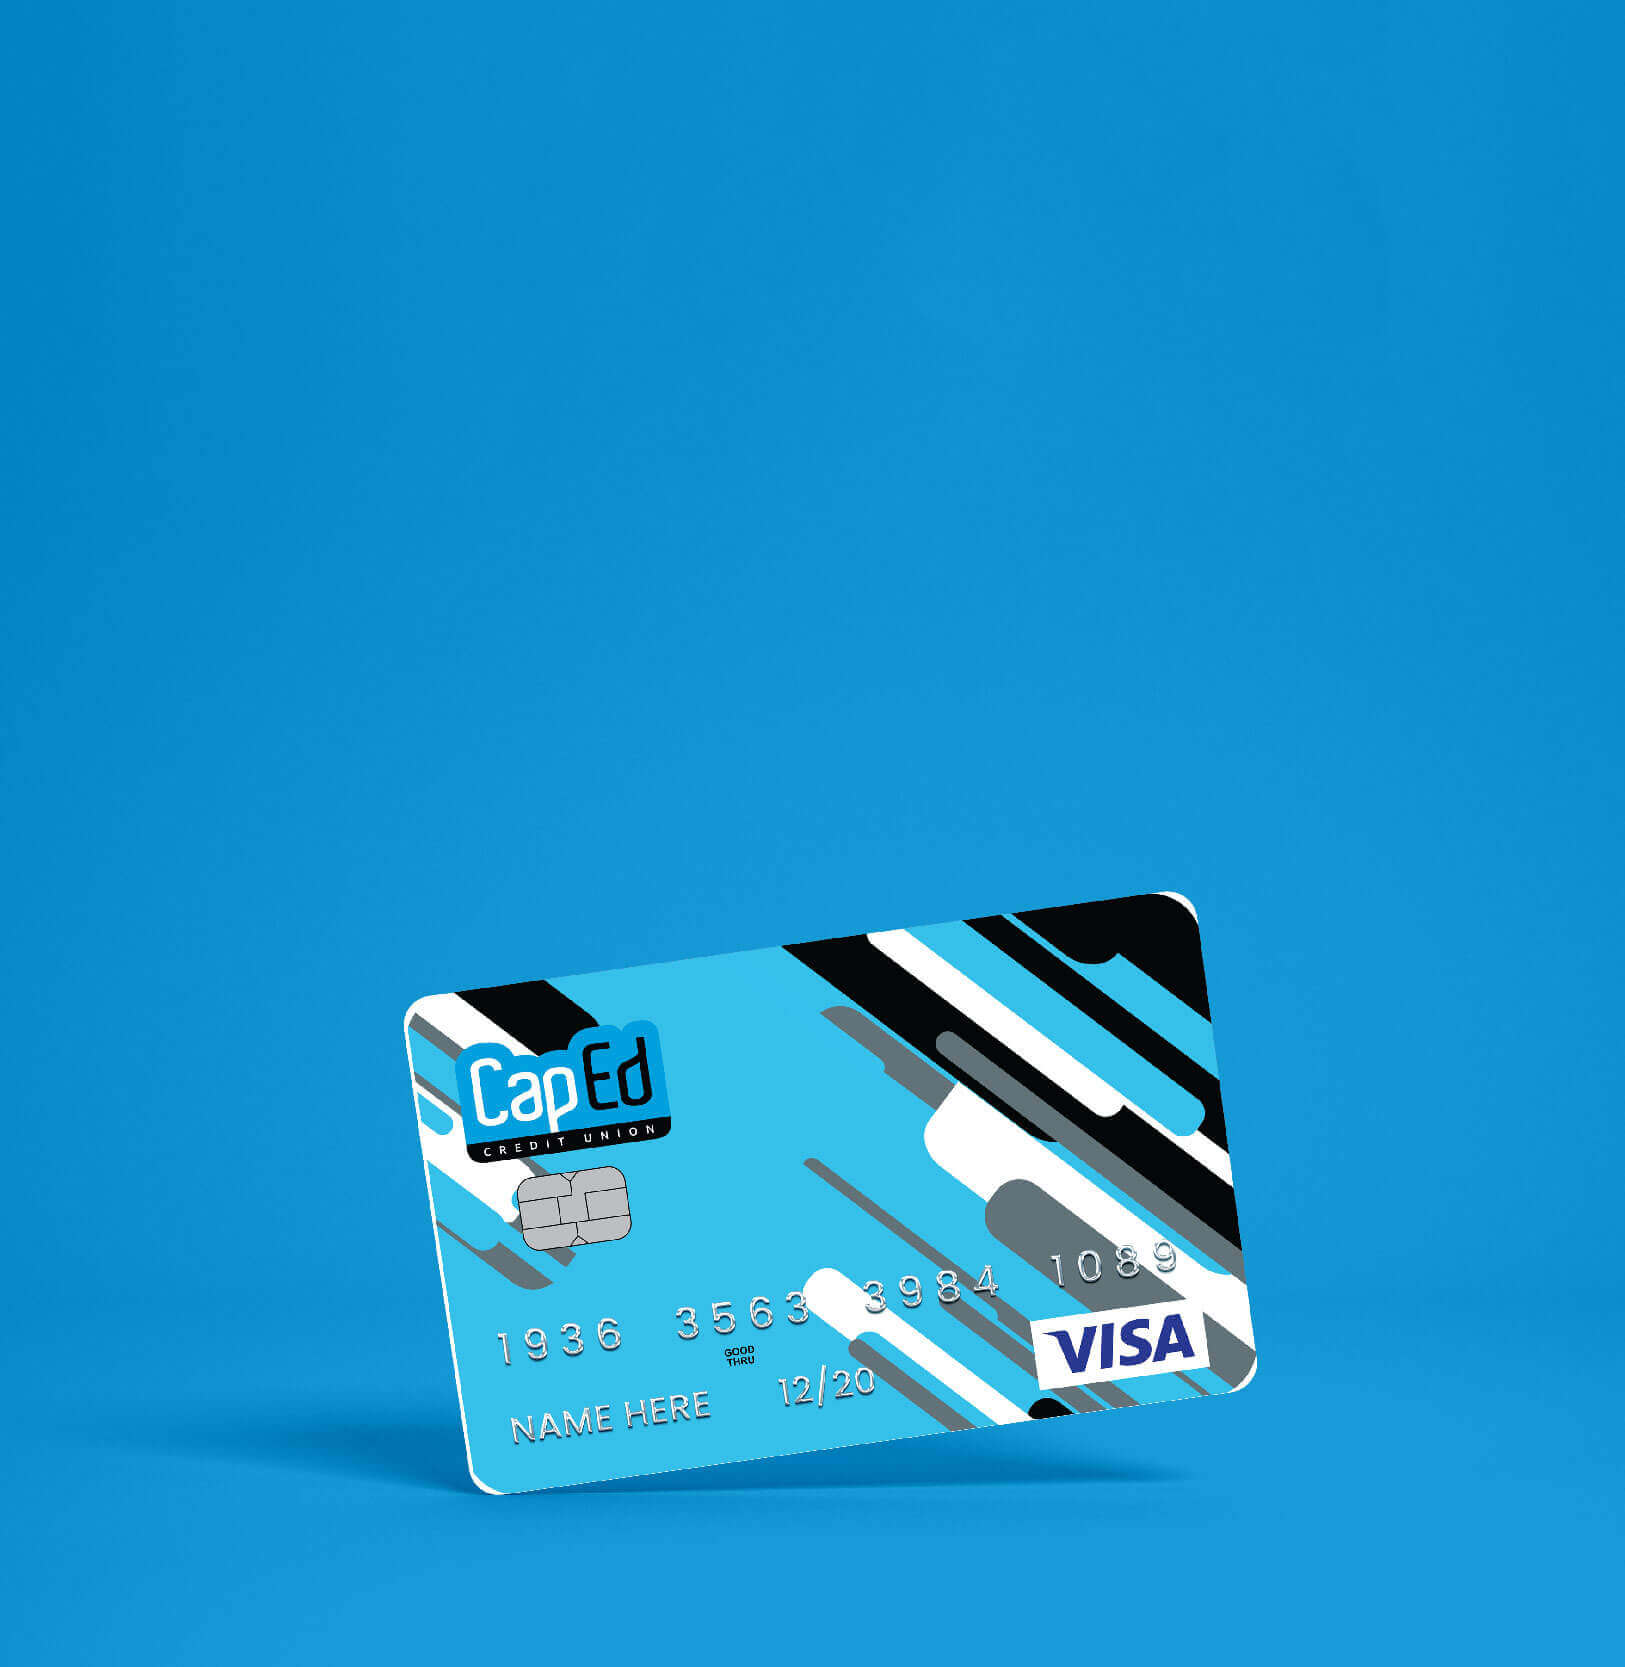 A stylistic picture of a sample CapEd Credit Card.